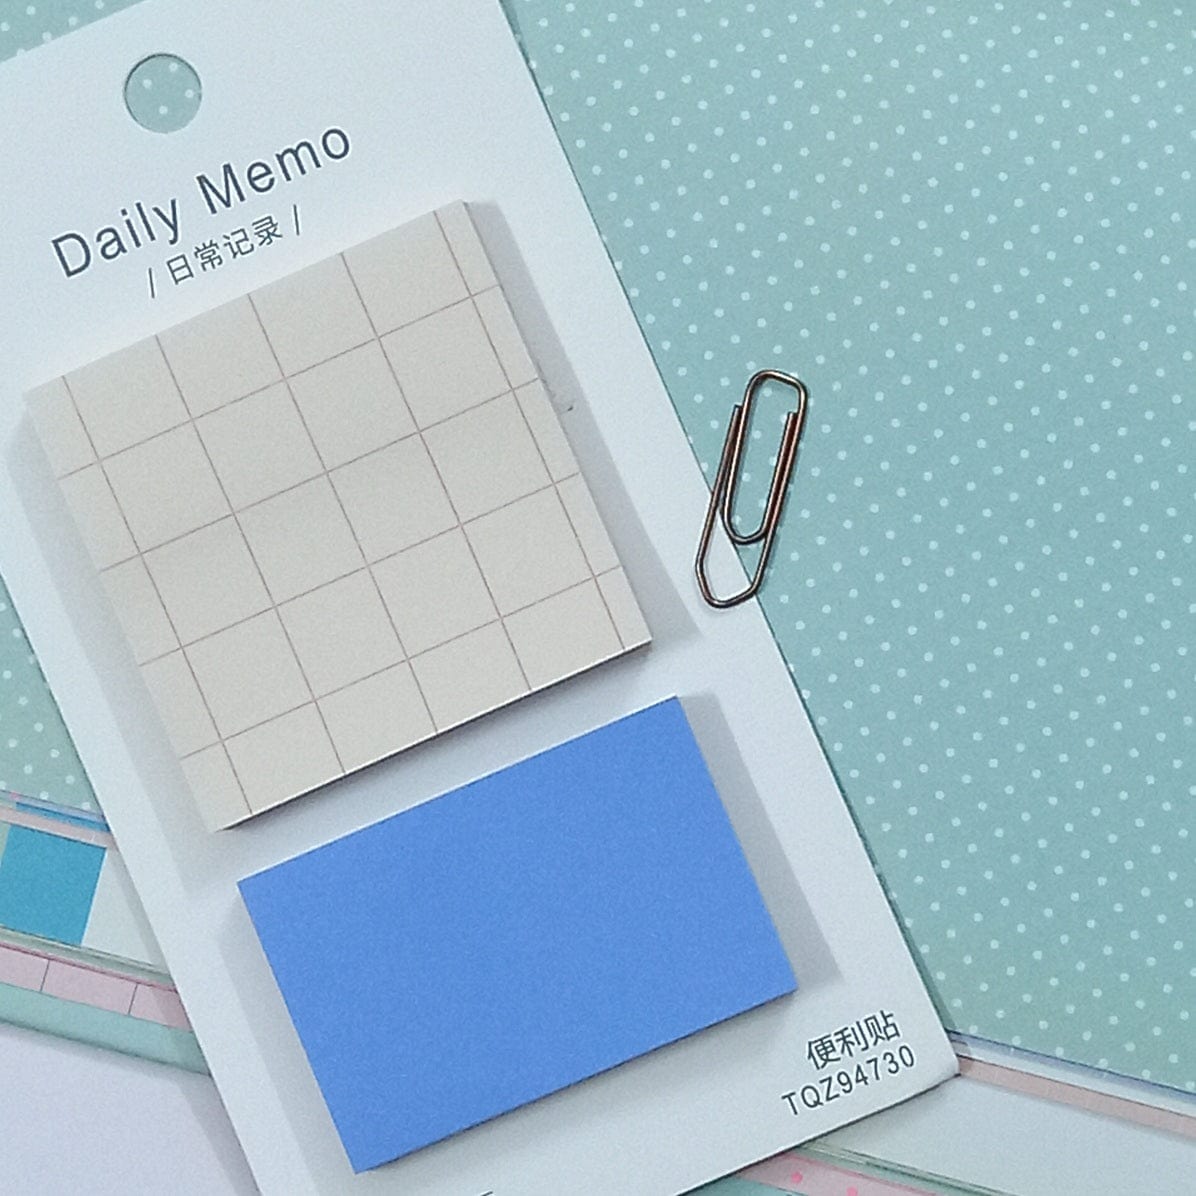 Nordic Checkered Daily Memo Sticky Note | Gifts of Love